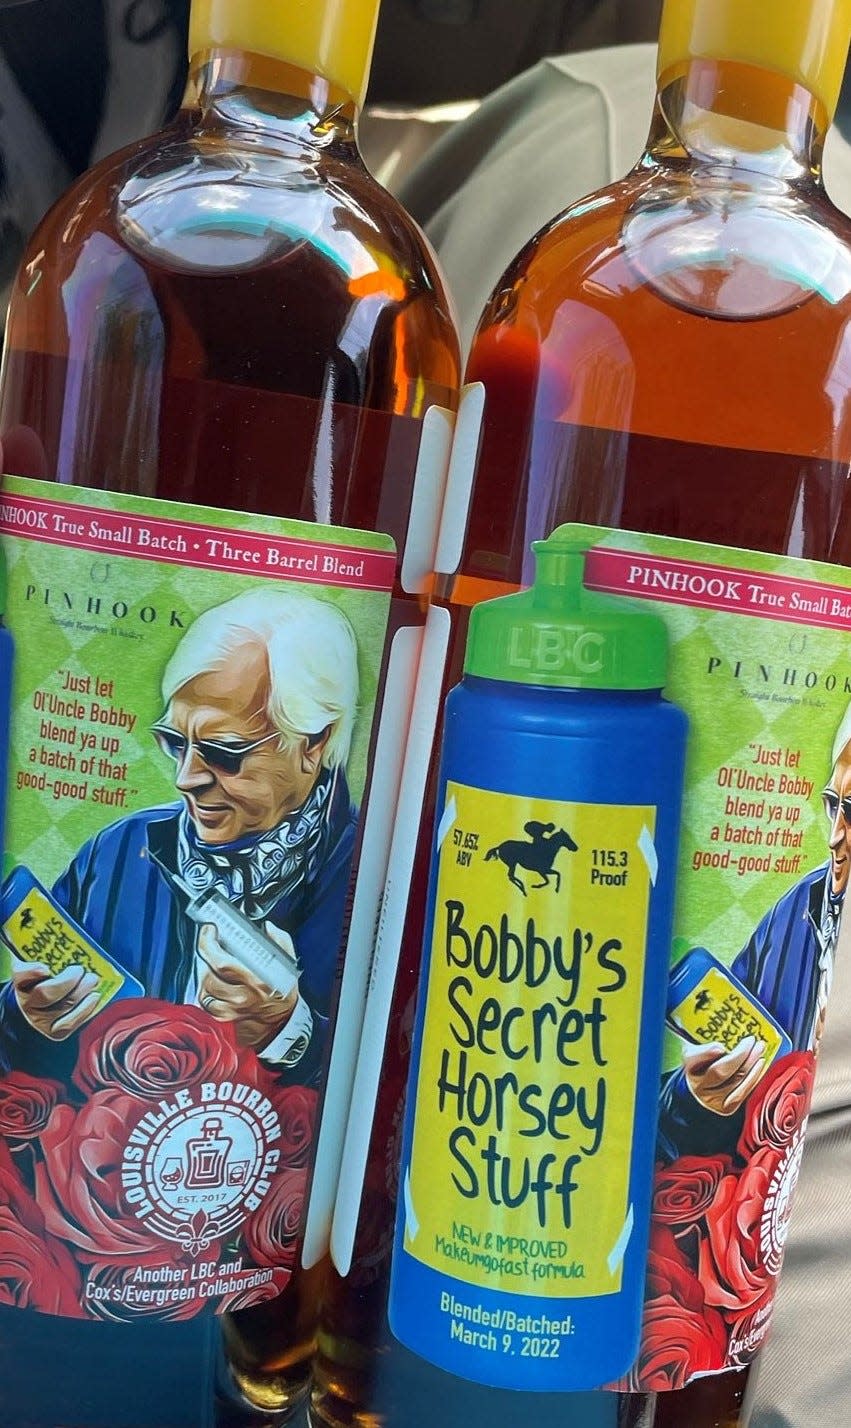 The Louisville Bourbon Club and Cox's & Evergreen Liquors collaborated on "Bobby's Secret Horsey Stuff," a limited edition bottle of Pinhook bourbon featuring a label that depicts Hall of Fame horse trainer Bob Baffert holding a syringe. Baffert is currently suspended from Churchill Downs and the New York Racing Association after disqualified 2021 Kentucky Derby winner Medina Spirit tested positive for a banned steroid.